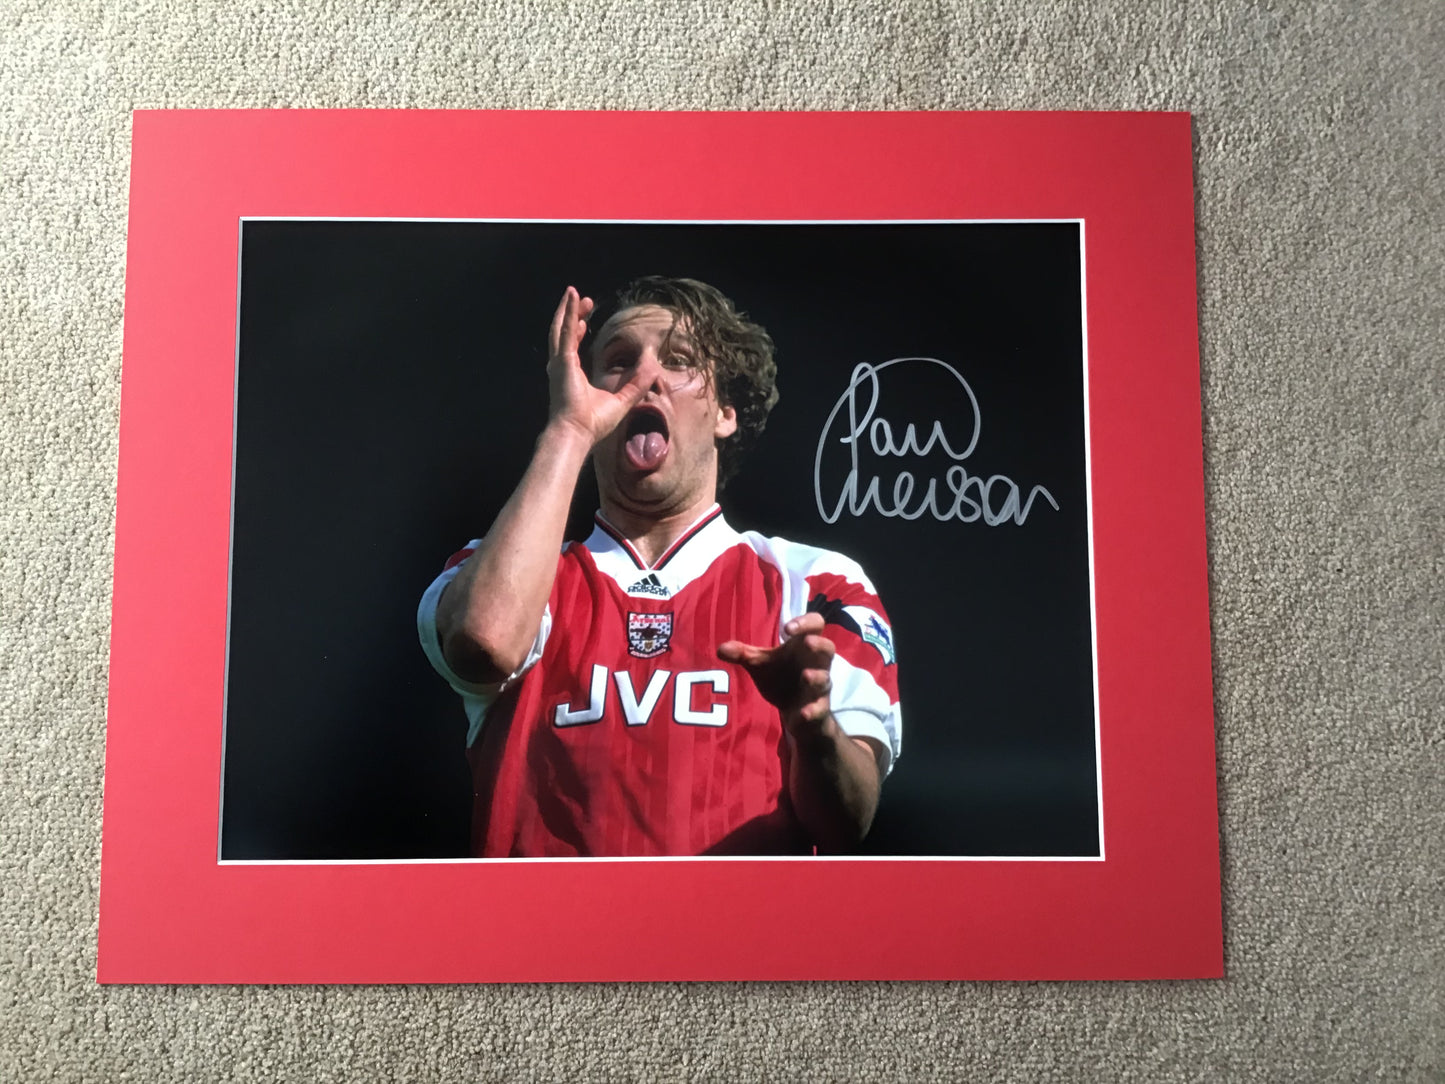 Paul Merson - Arsenal FC - 20x16in signed photo montage - AFC memorabilia, football gift, display (UNFRAMED)